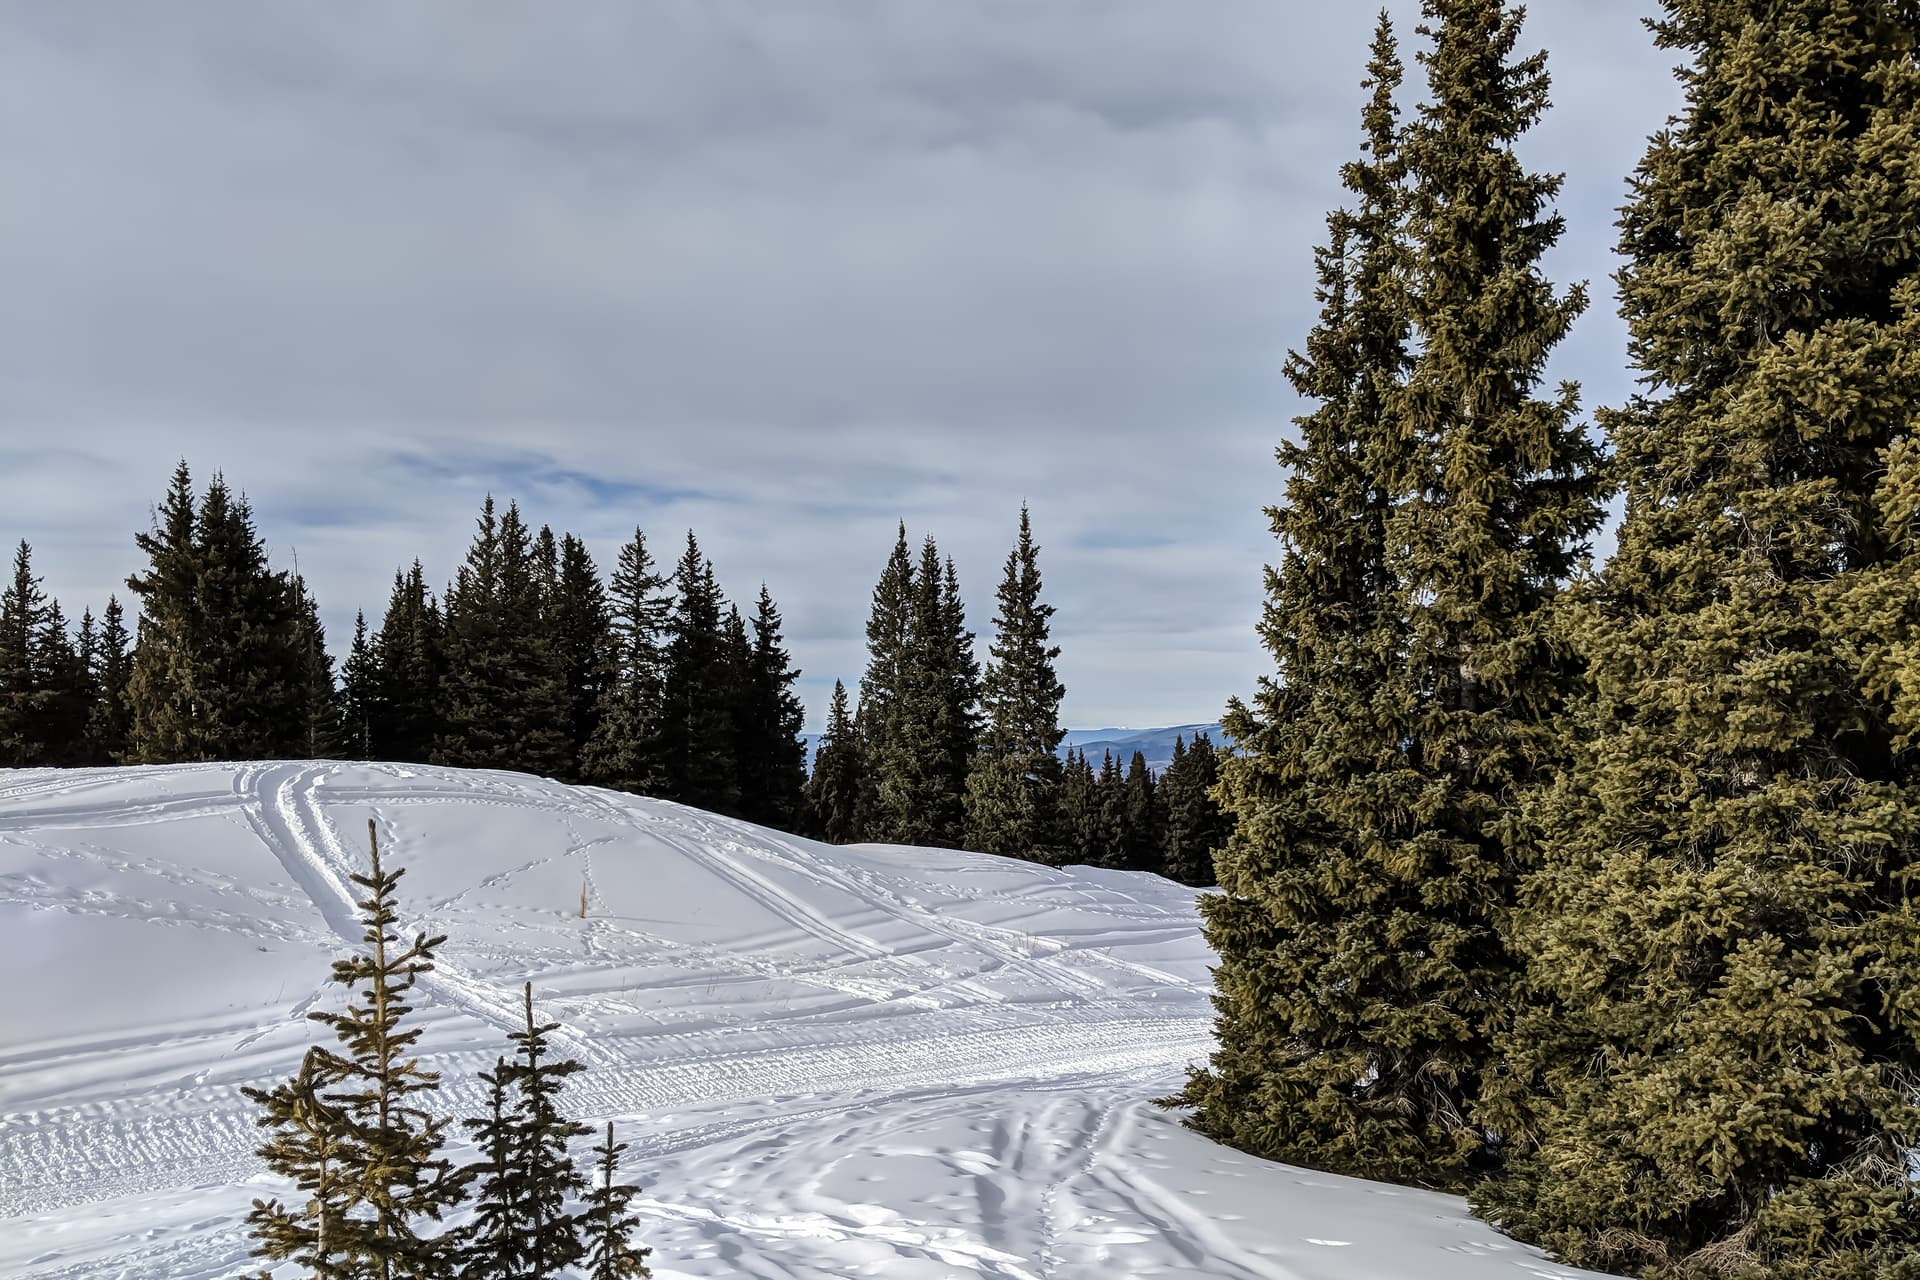 Tall, thin pine trees surround a snow-covered clearing. The tracks of skiers and snow mobiles can be seen on the ground.